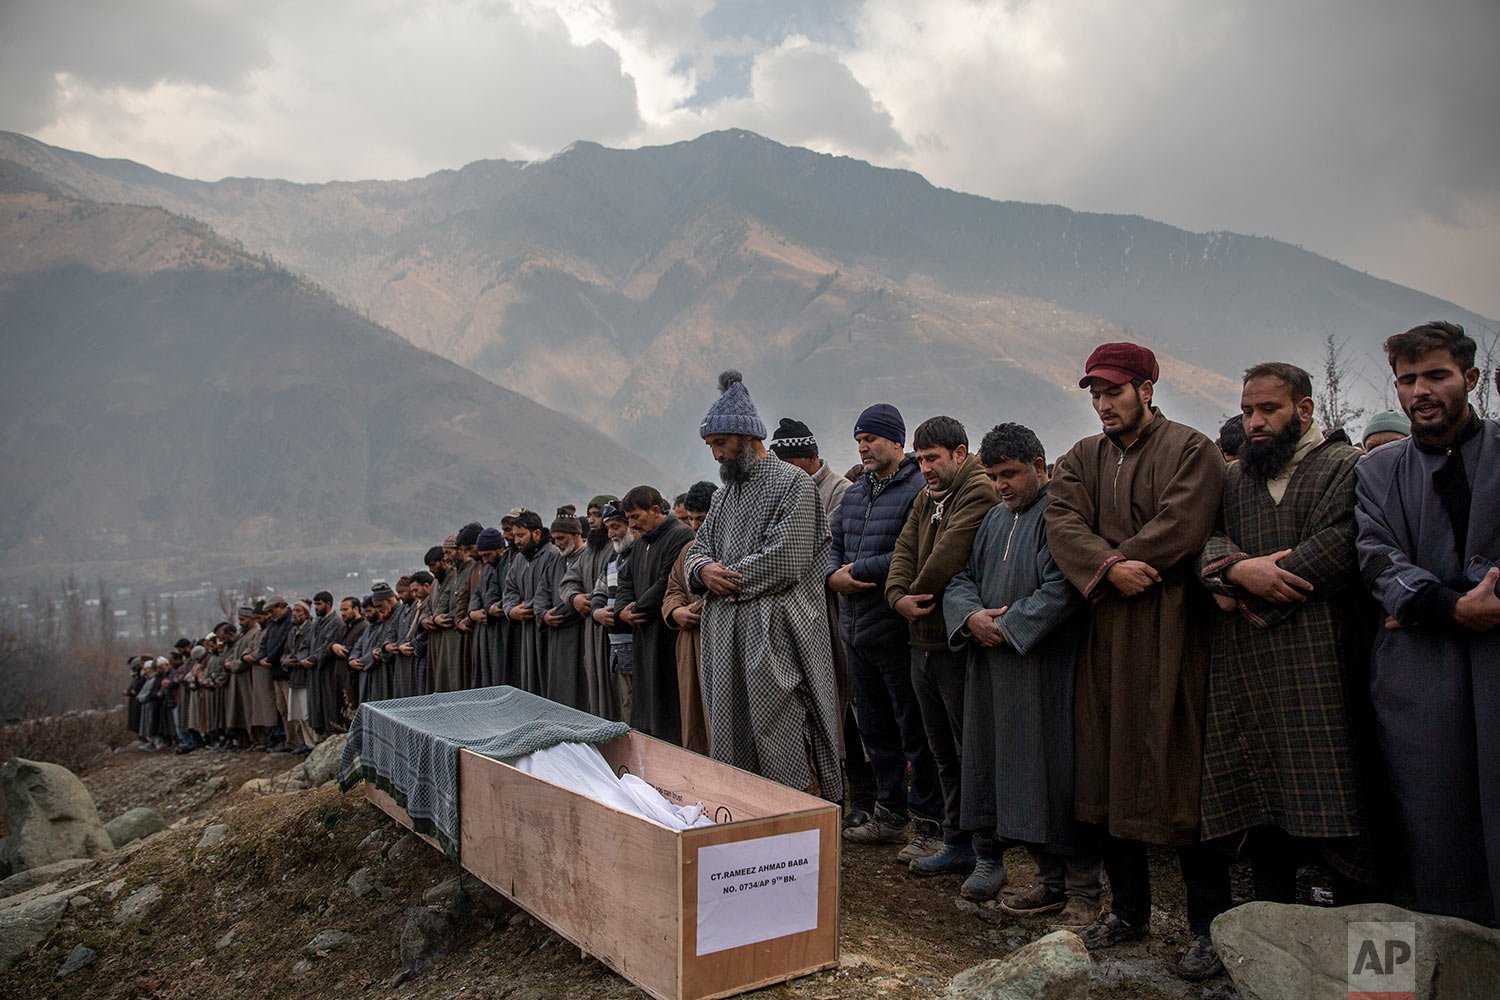  Relatives and neighbors pray by the body of Rameez Ahmad, a policeman who was killed in Monday's gun attack, during his funeral in Yachama, northeast of Srinagar, Indian controlled Kashmir, Tuesday, Dec. 14, 2021. (AP Photo/Dar Yasin) 